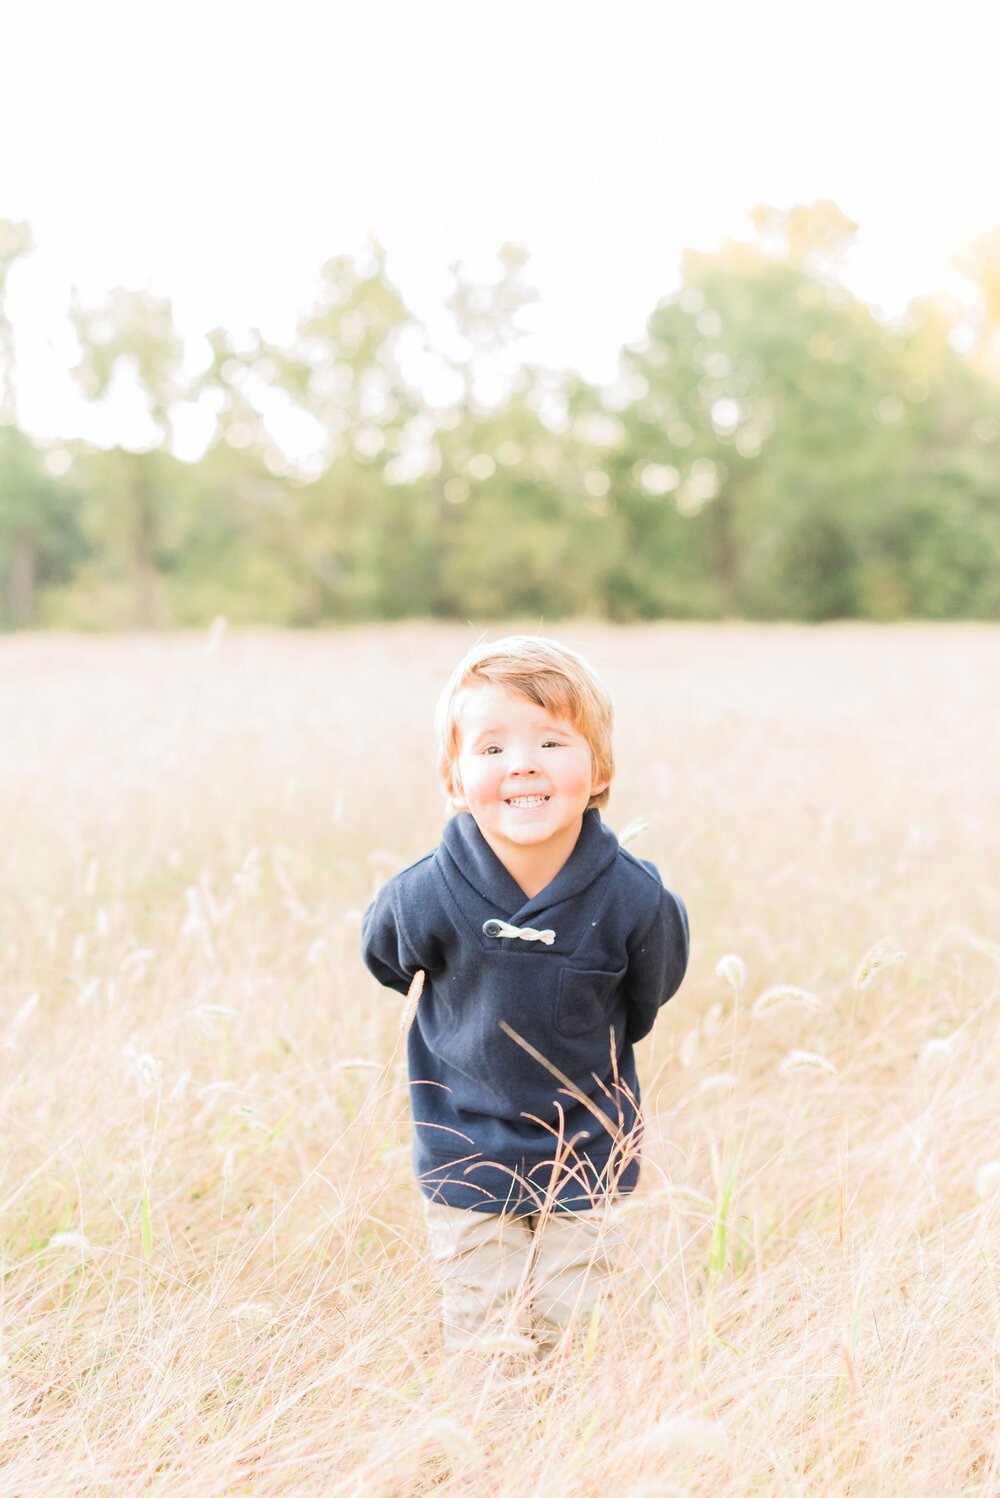  A little boy shows his cheesy grin in a grassy field during a photo shoot by Jackie Erickson, a Roswell photographer. Children's portraits capture their childhood #childportraits #childrenphotographer #notyourschoolpicture #georgiaphotographer 